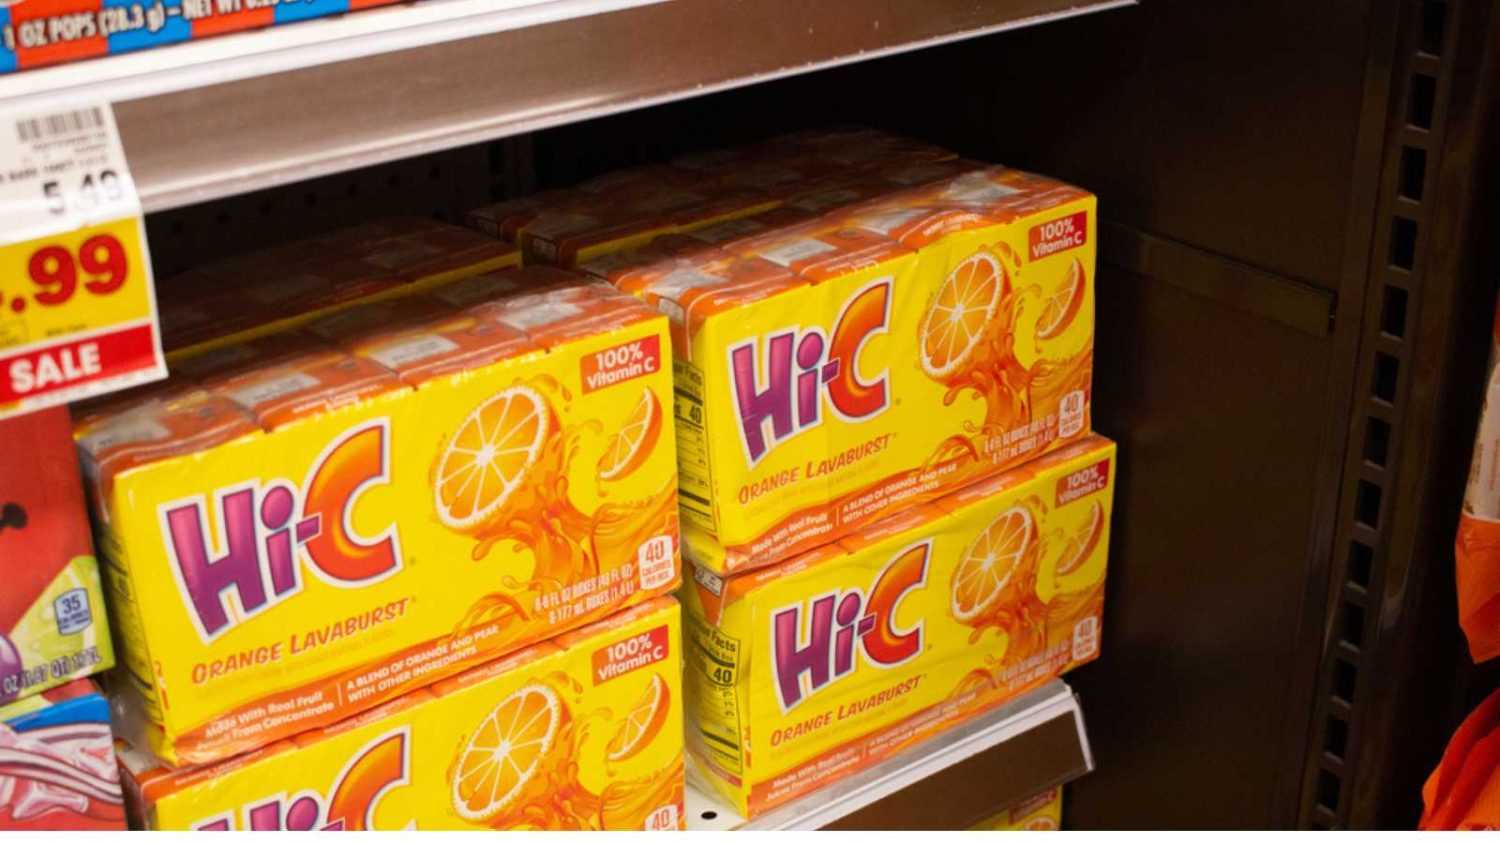 Los Angeles, California, United States - 05-21-2021: A view of several packages of Hi-C orange lavaburst flavor drinks, on display at a local grocery store.